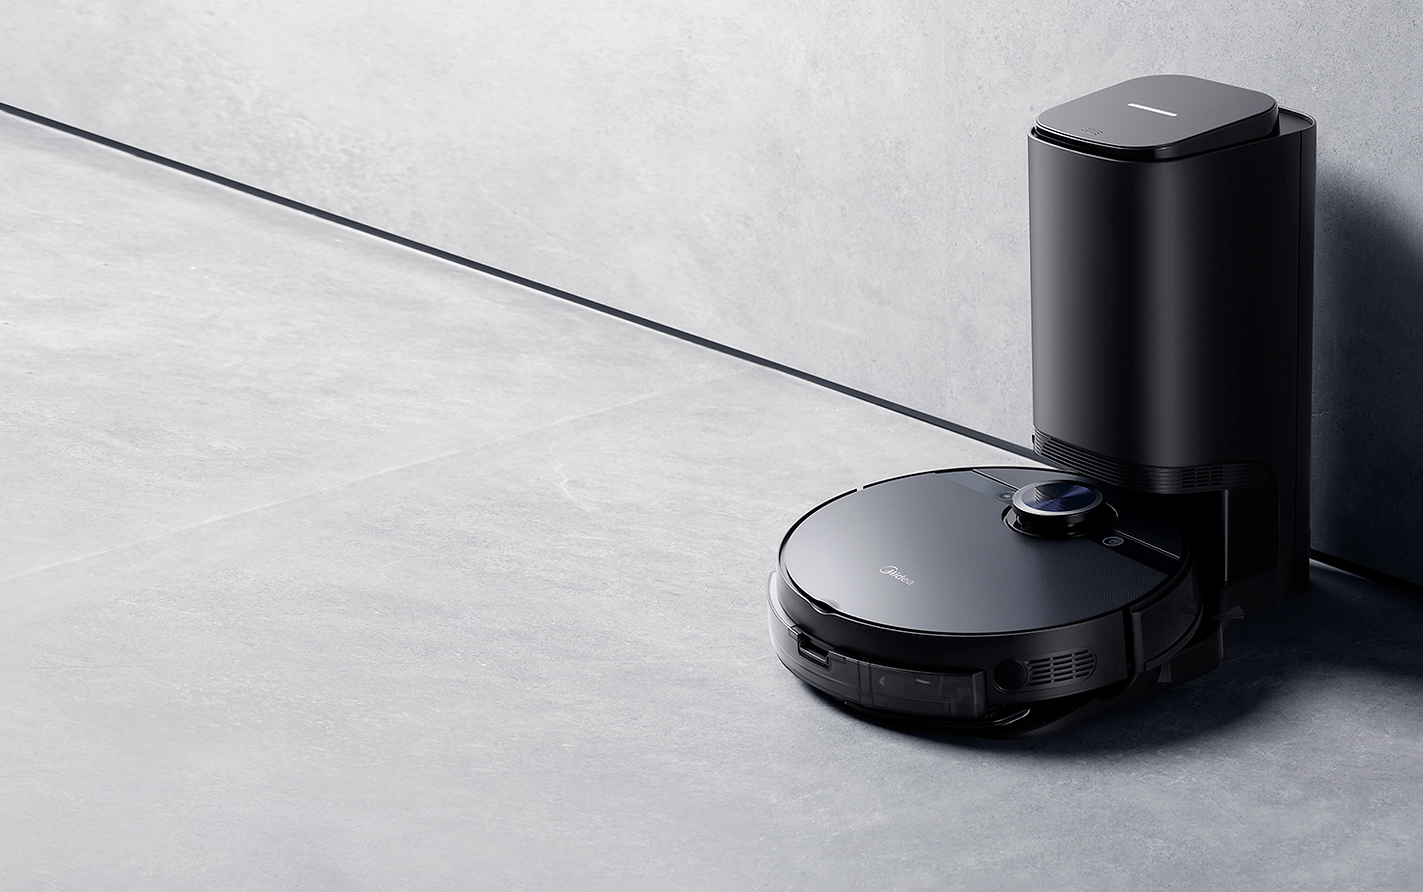 Midea adds new robot vacuum to its intelligent cleaning product line for 2021